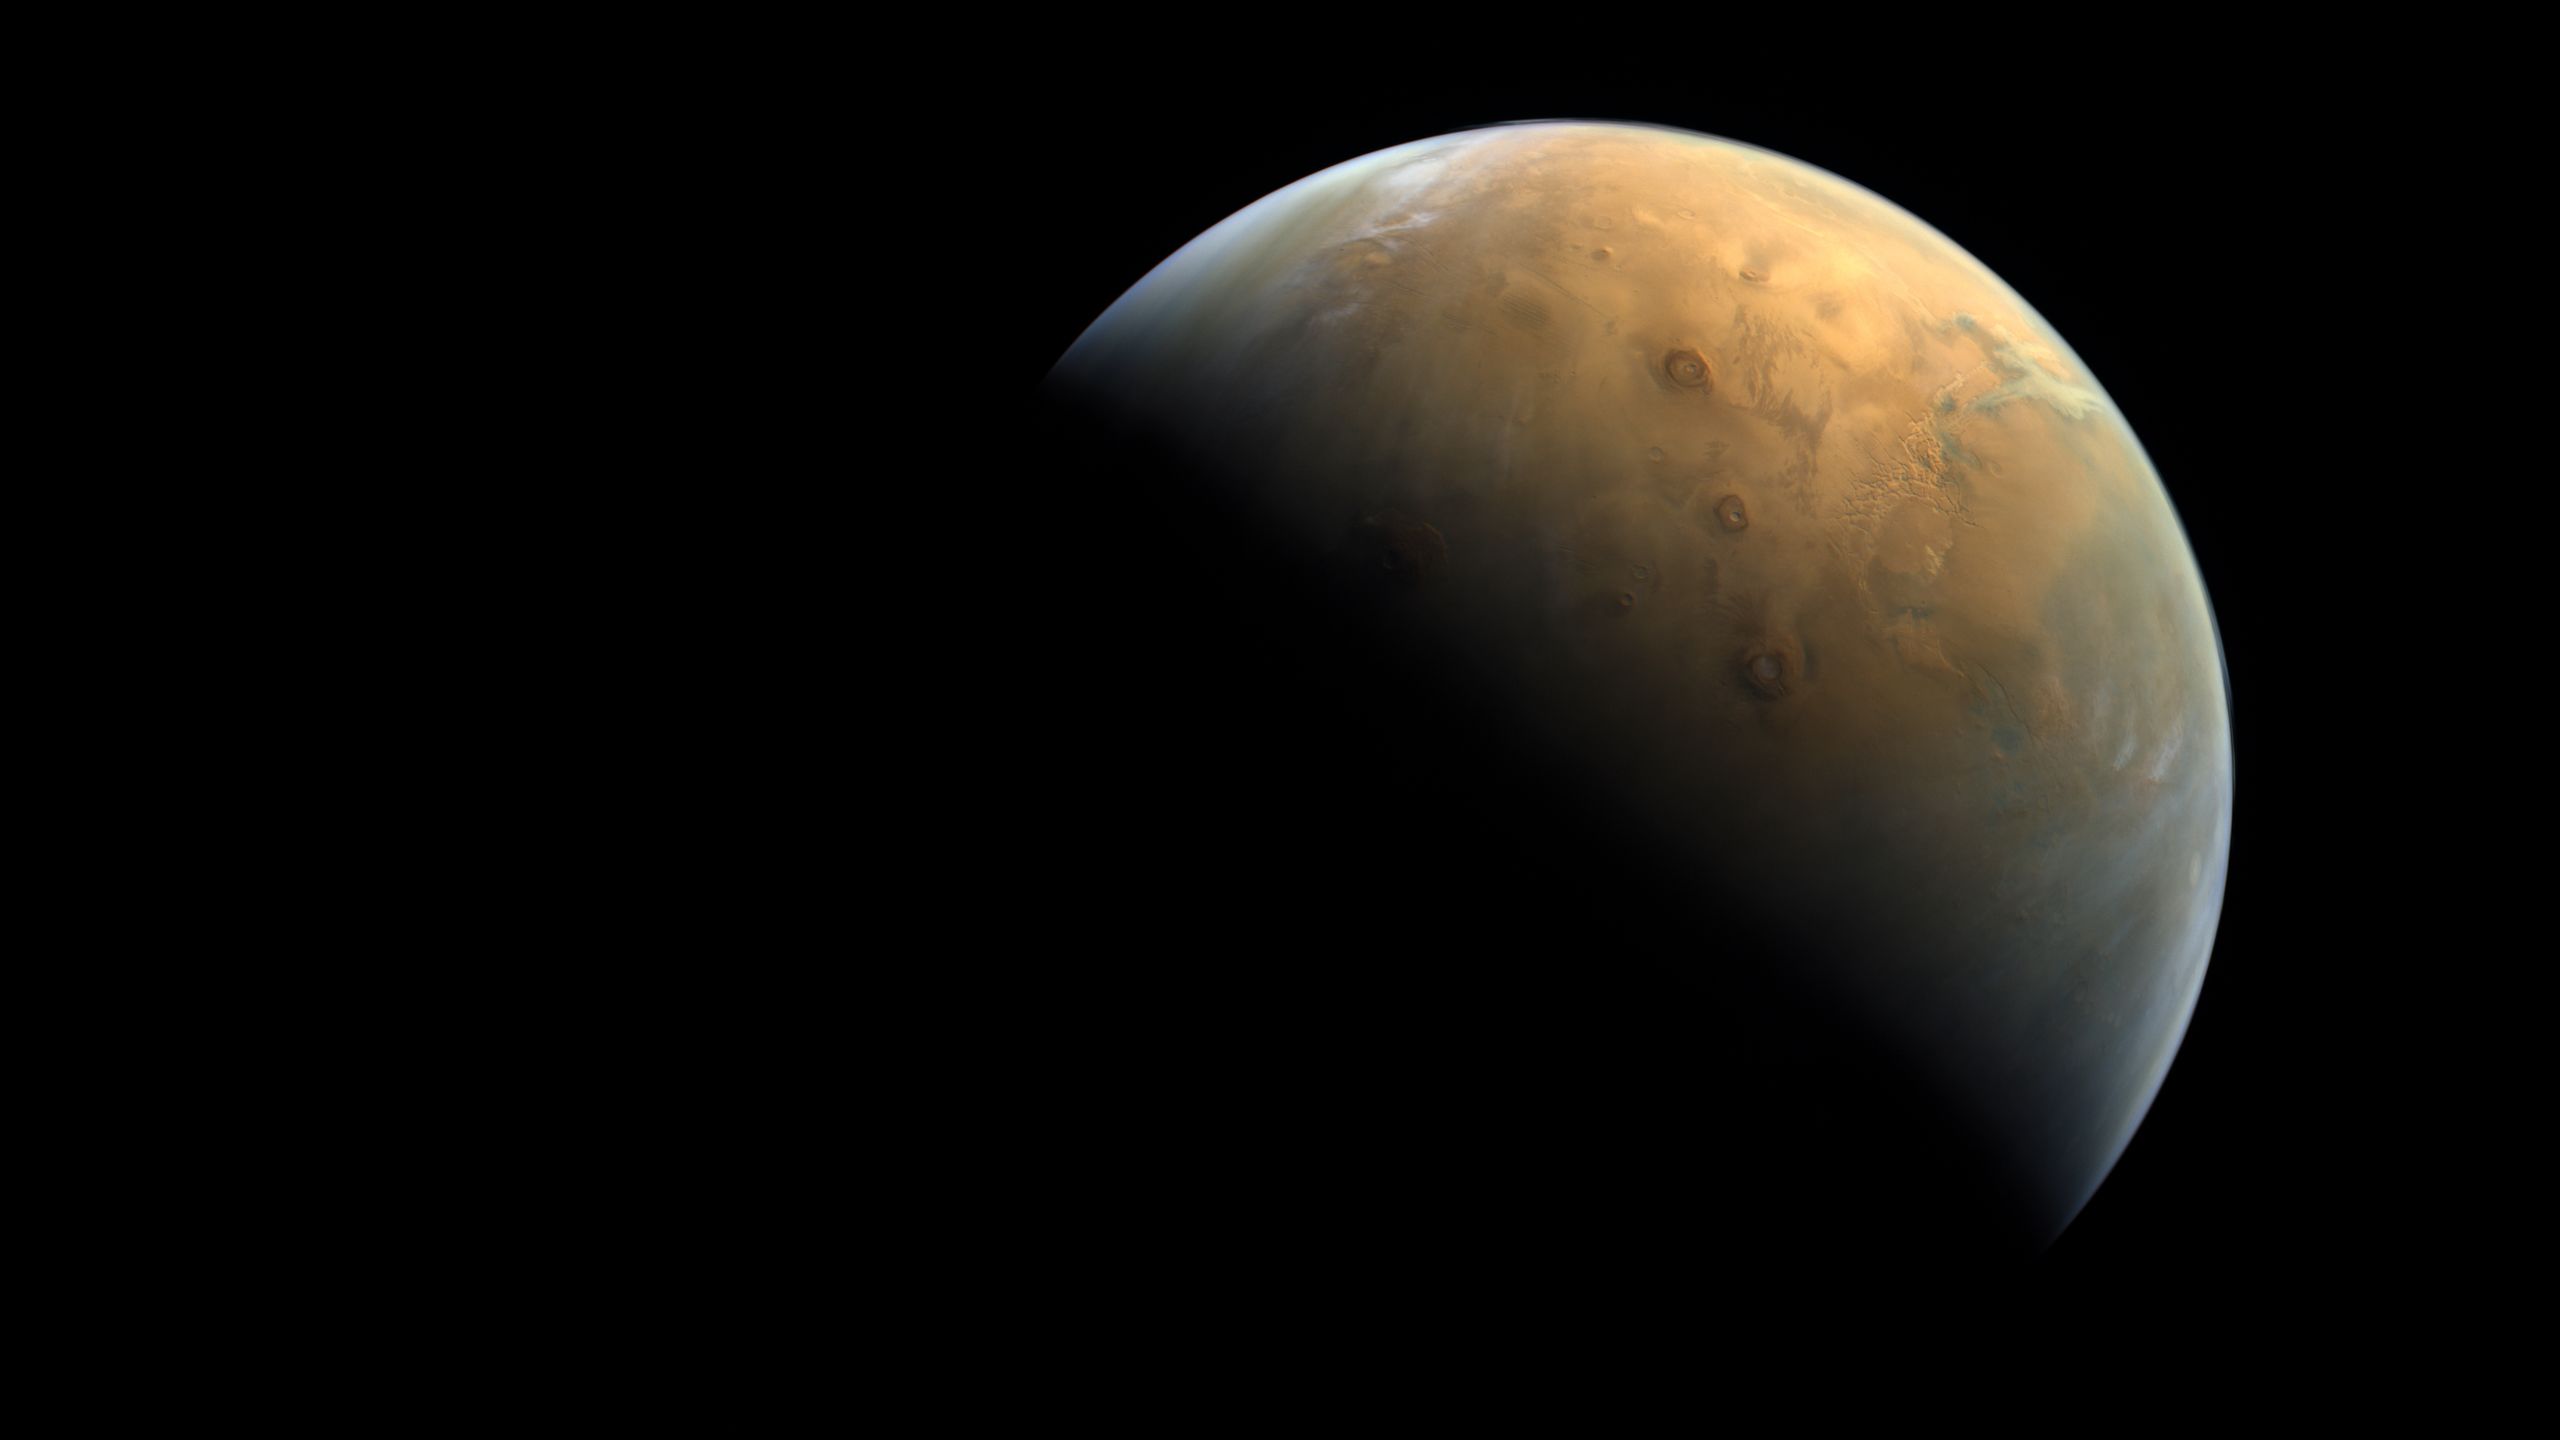 Mars photo taken by the Emirate eXploration Imager